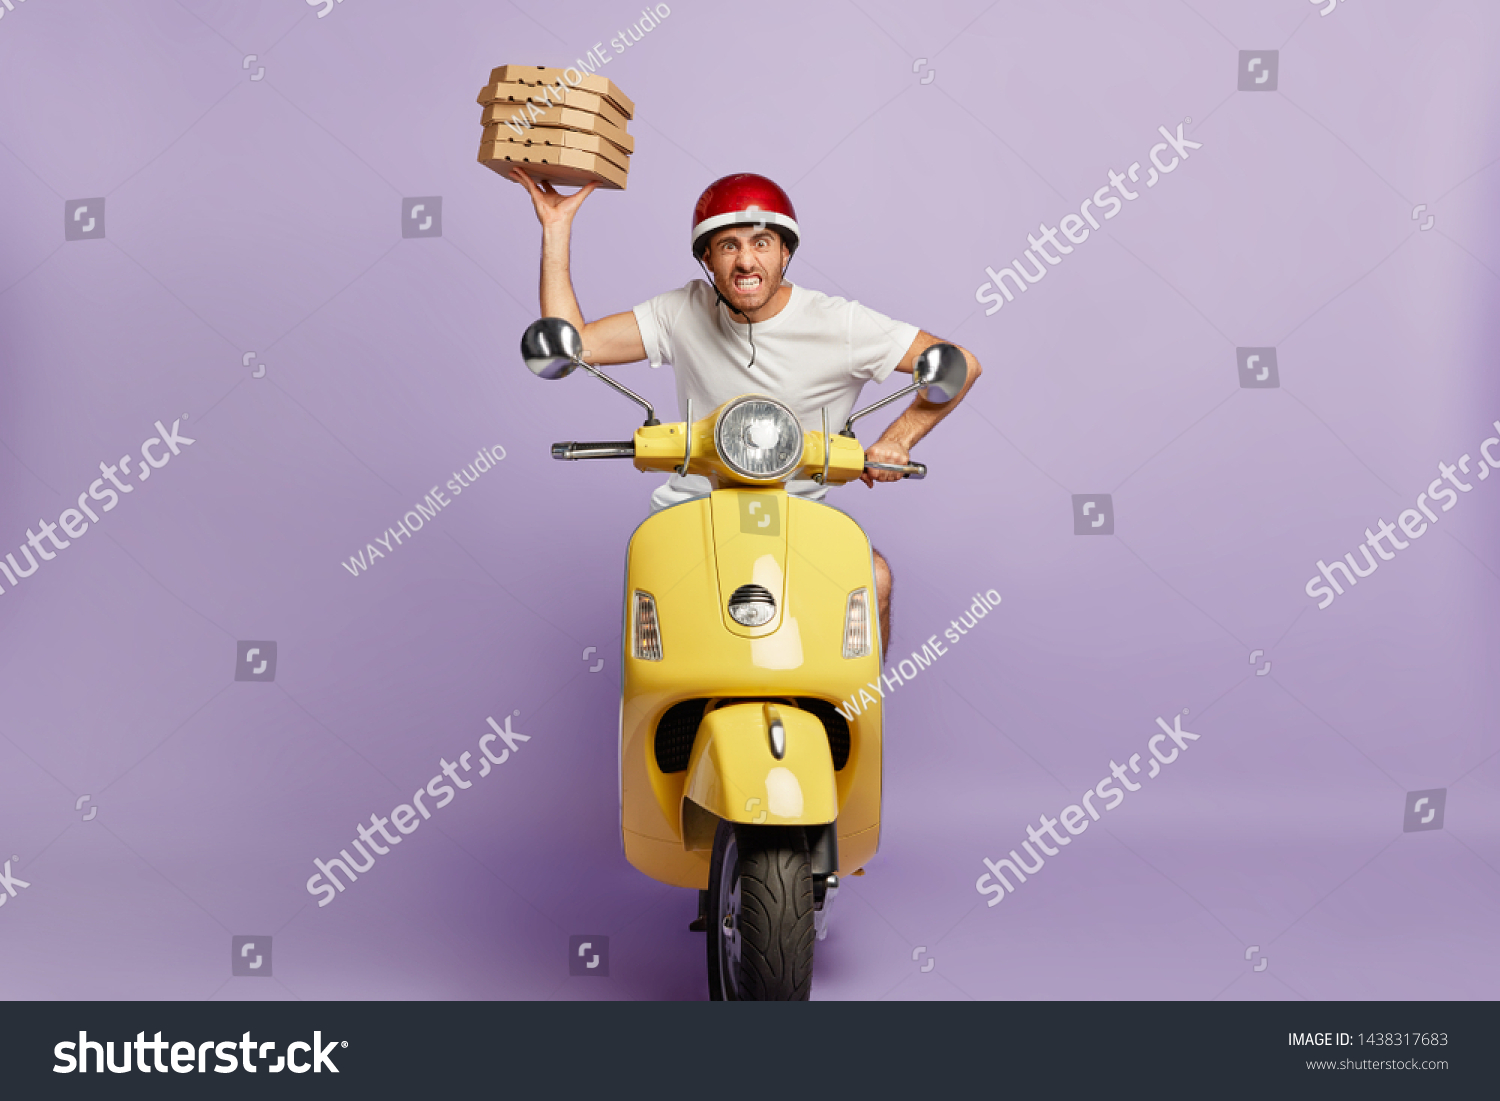 Food service, fast delivery concept. Impatient pizza delivery driver poses on fast motorbike, being in hurry with boxes of fast food, clenches teeth, annoyed with heavy traffic drives to customer home #1438317683